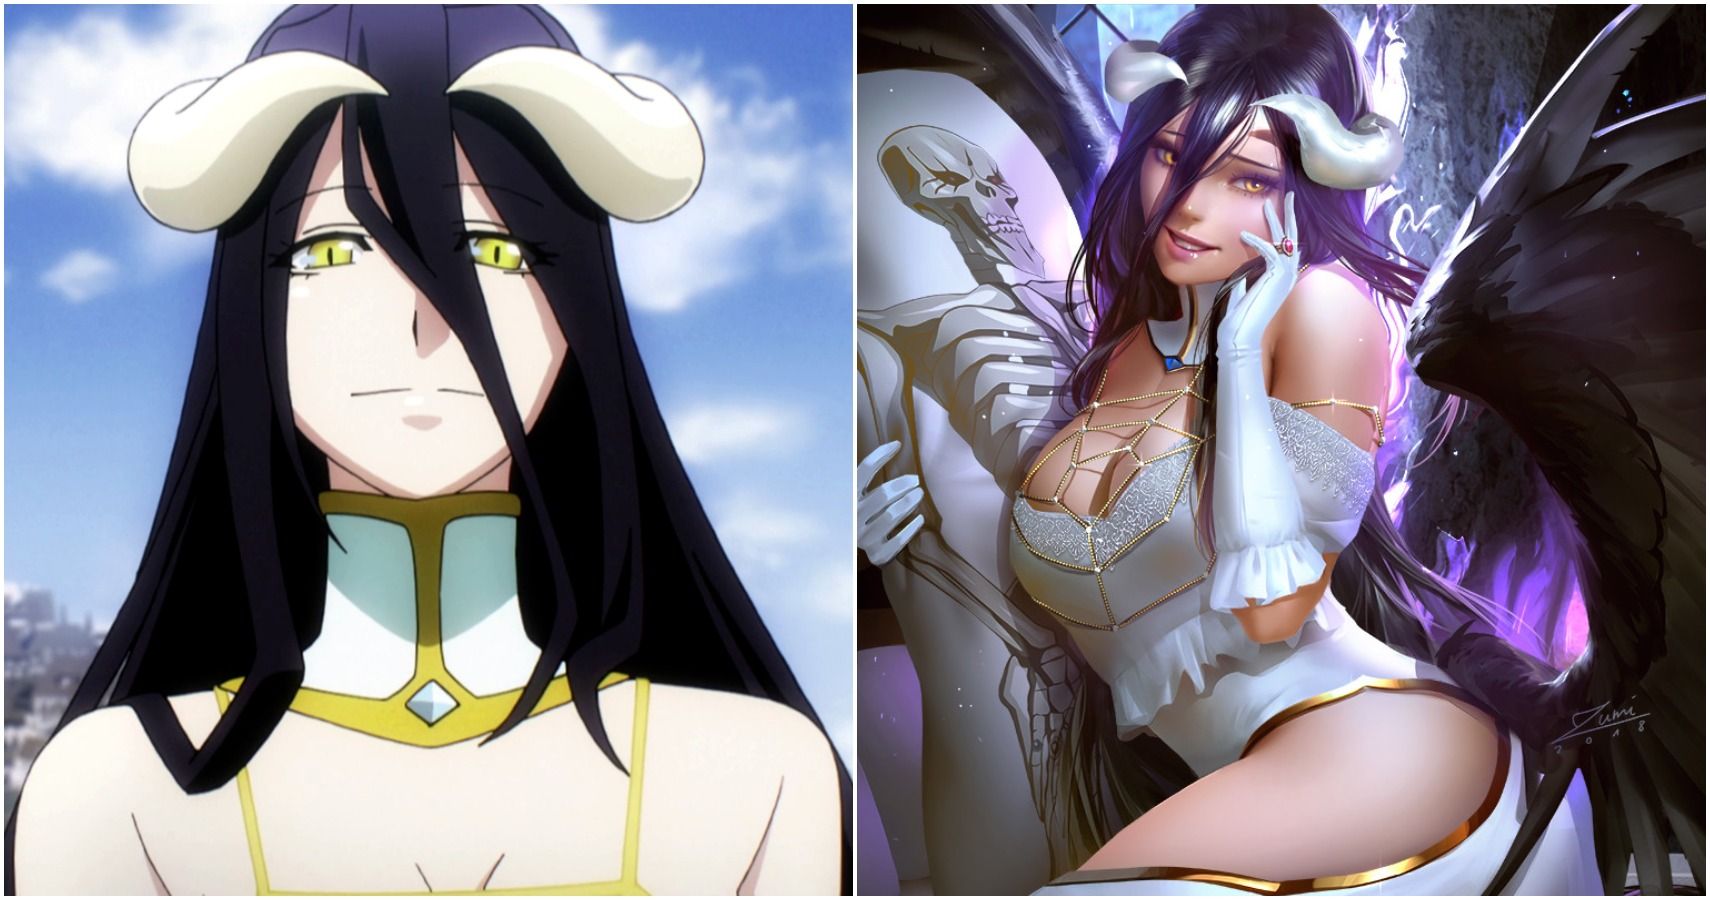 Albedo - Pleiades's bust size comparison. Some of you